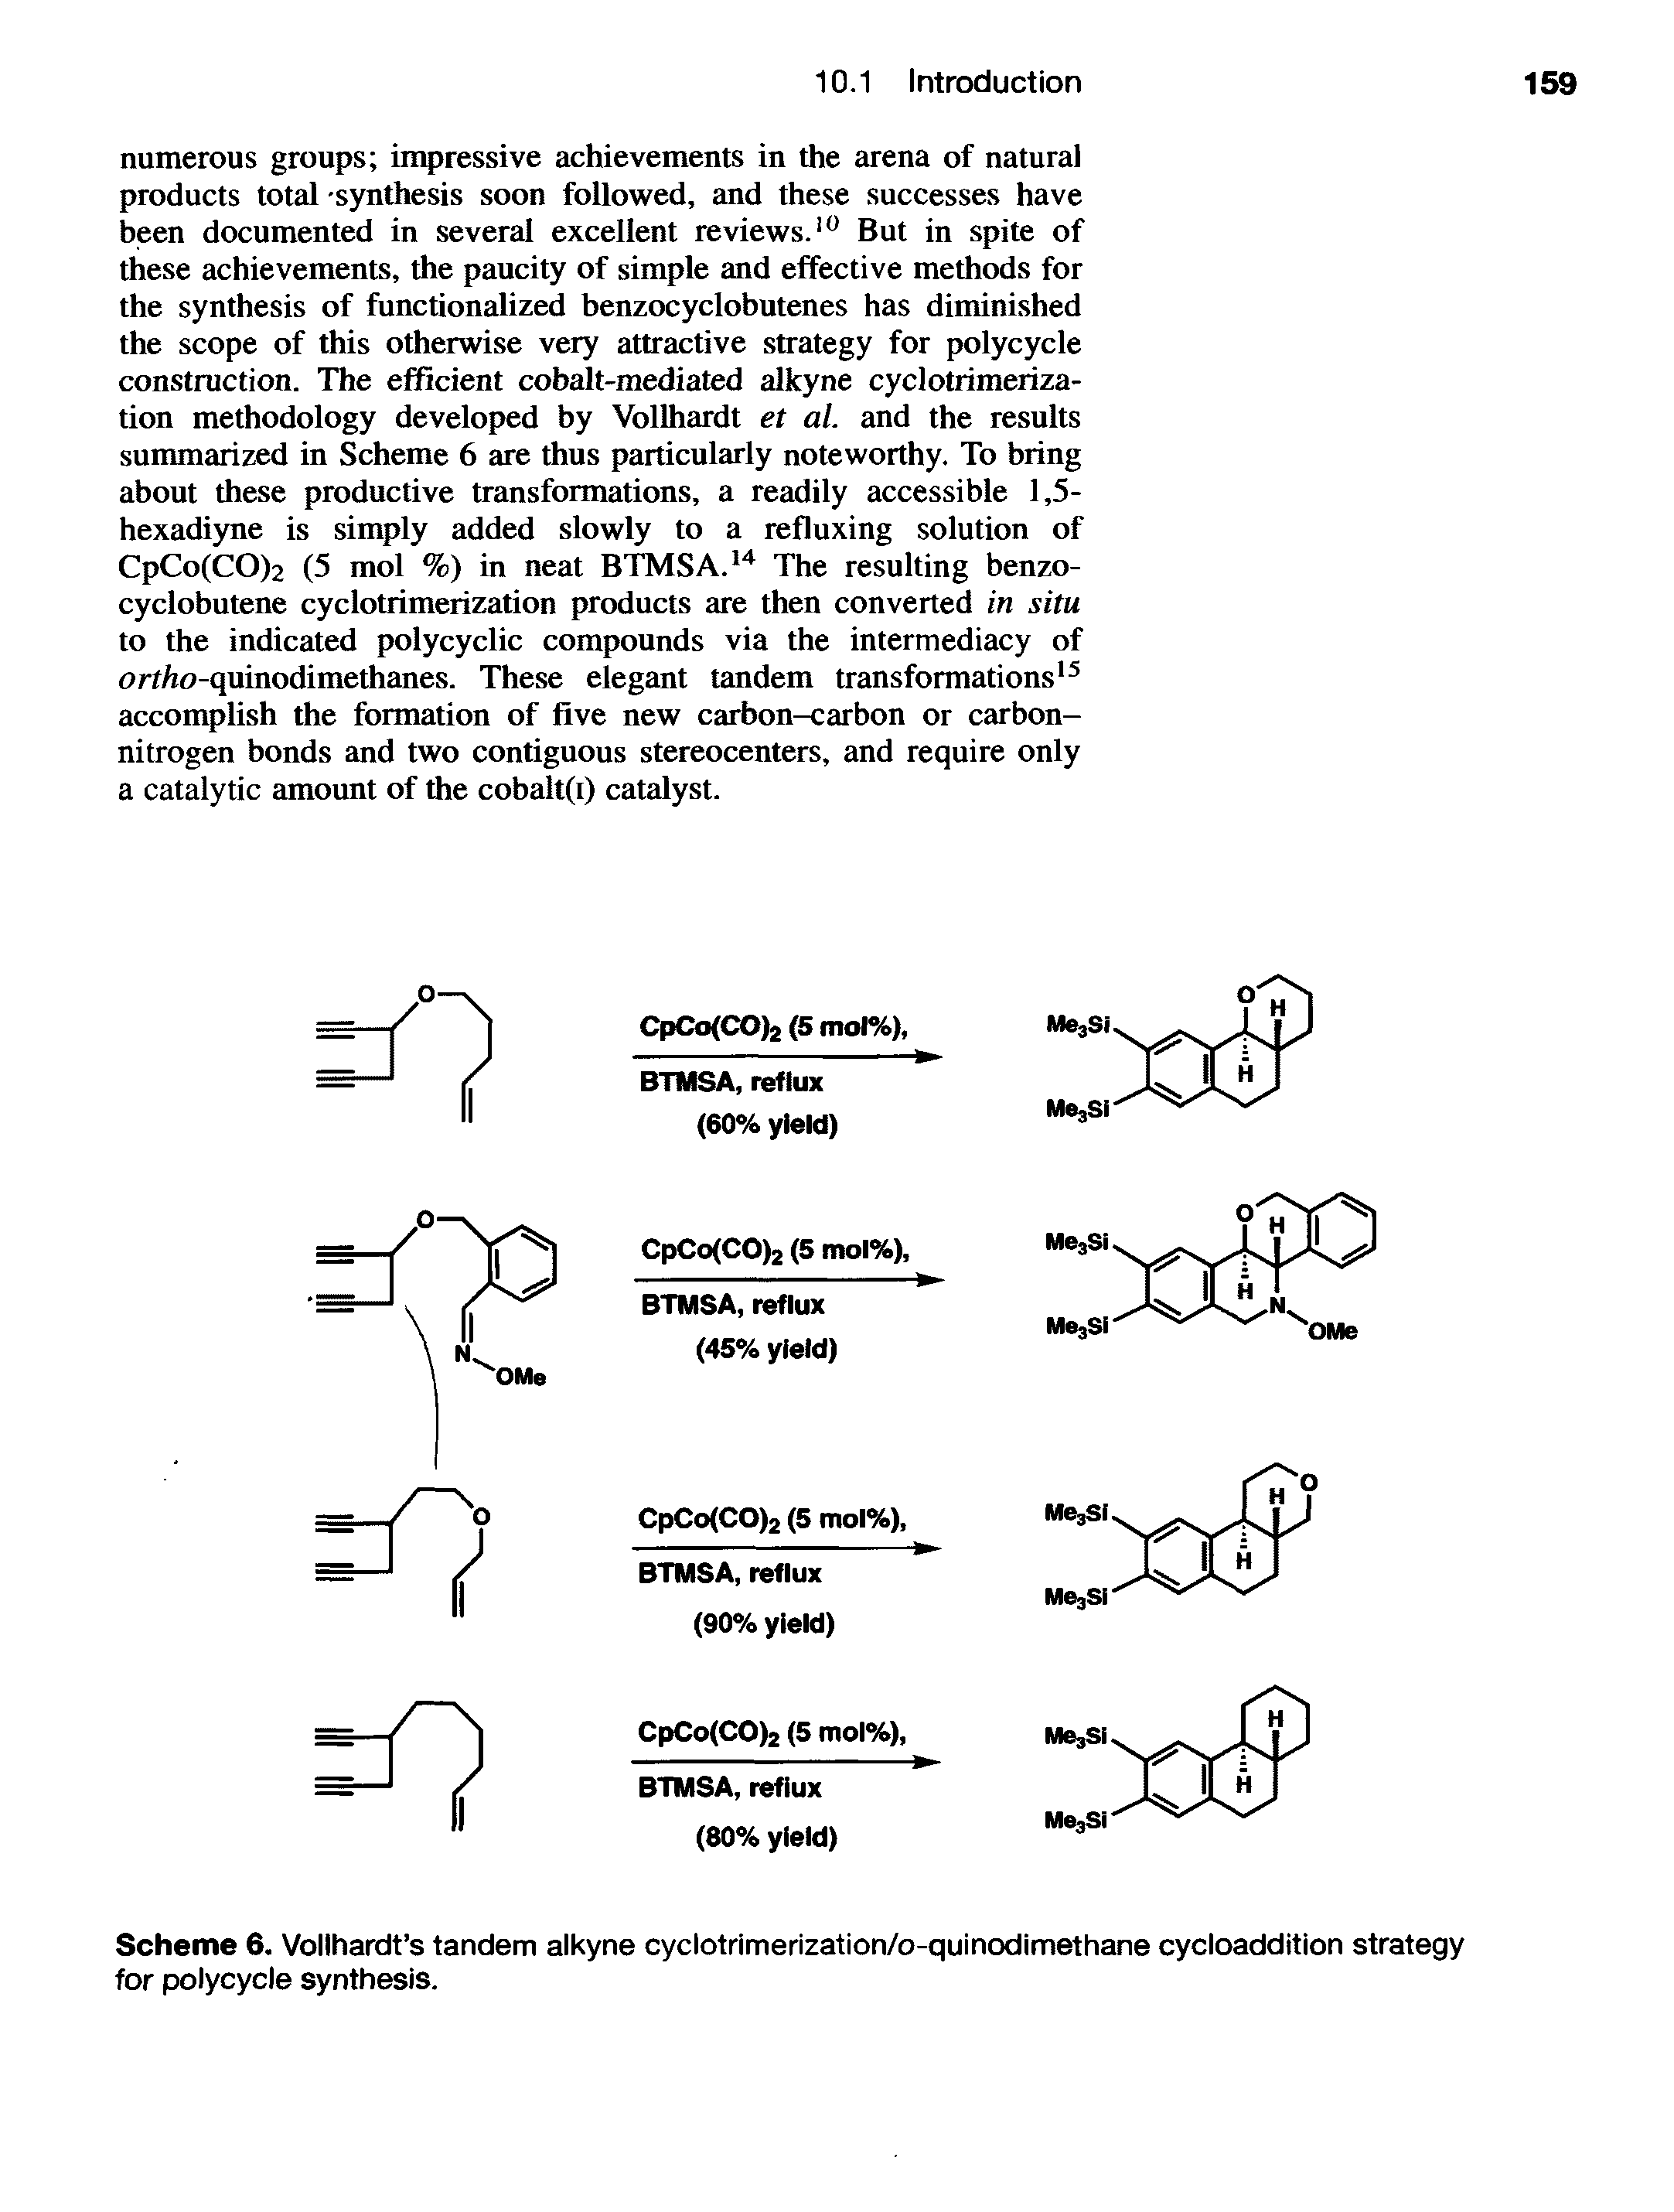 Scheme 6. Vollhardt s tandem alkyne cyclotrimerization/o-quinodimethane cycloaddition strategy for polycycle synthesis.